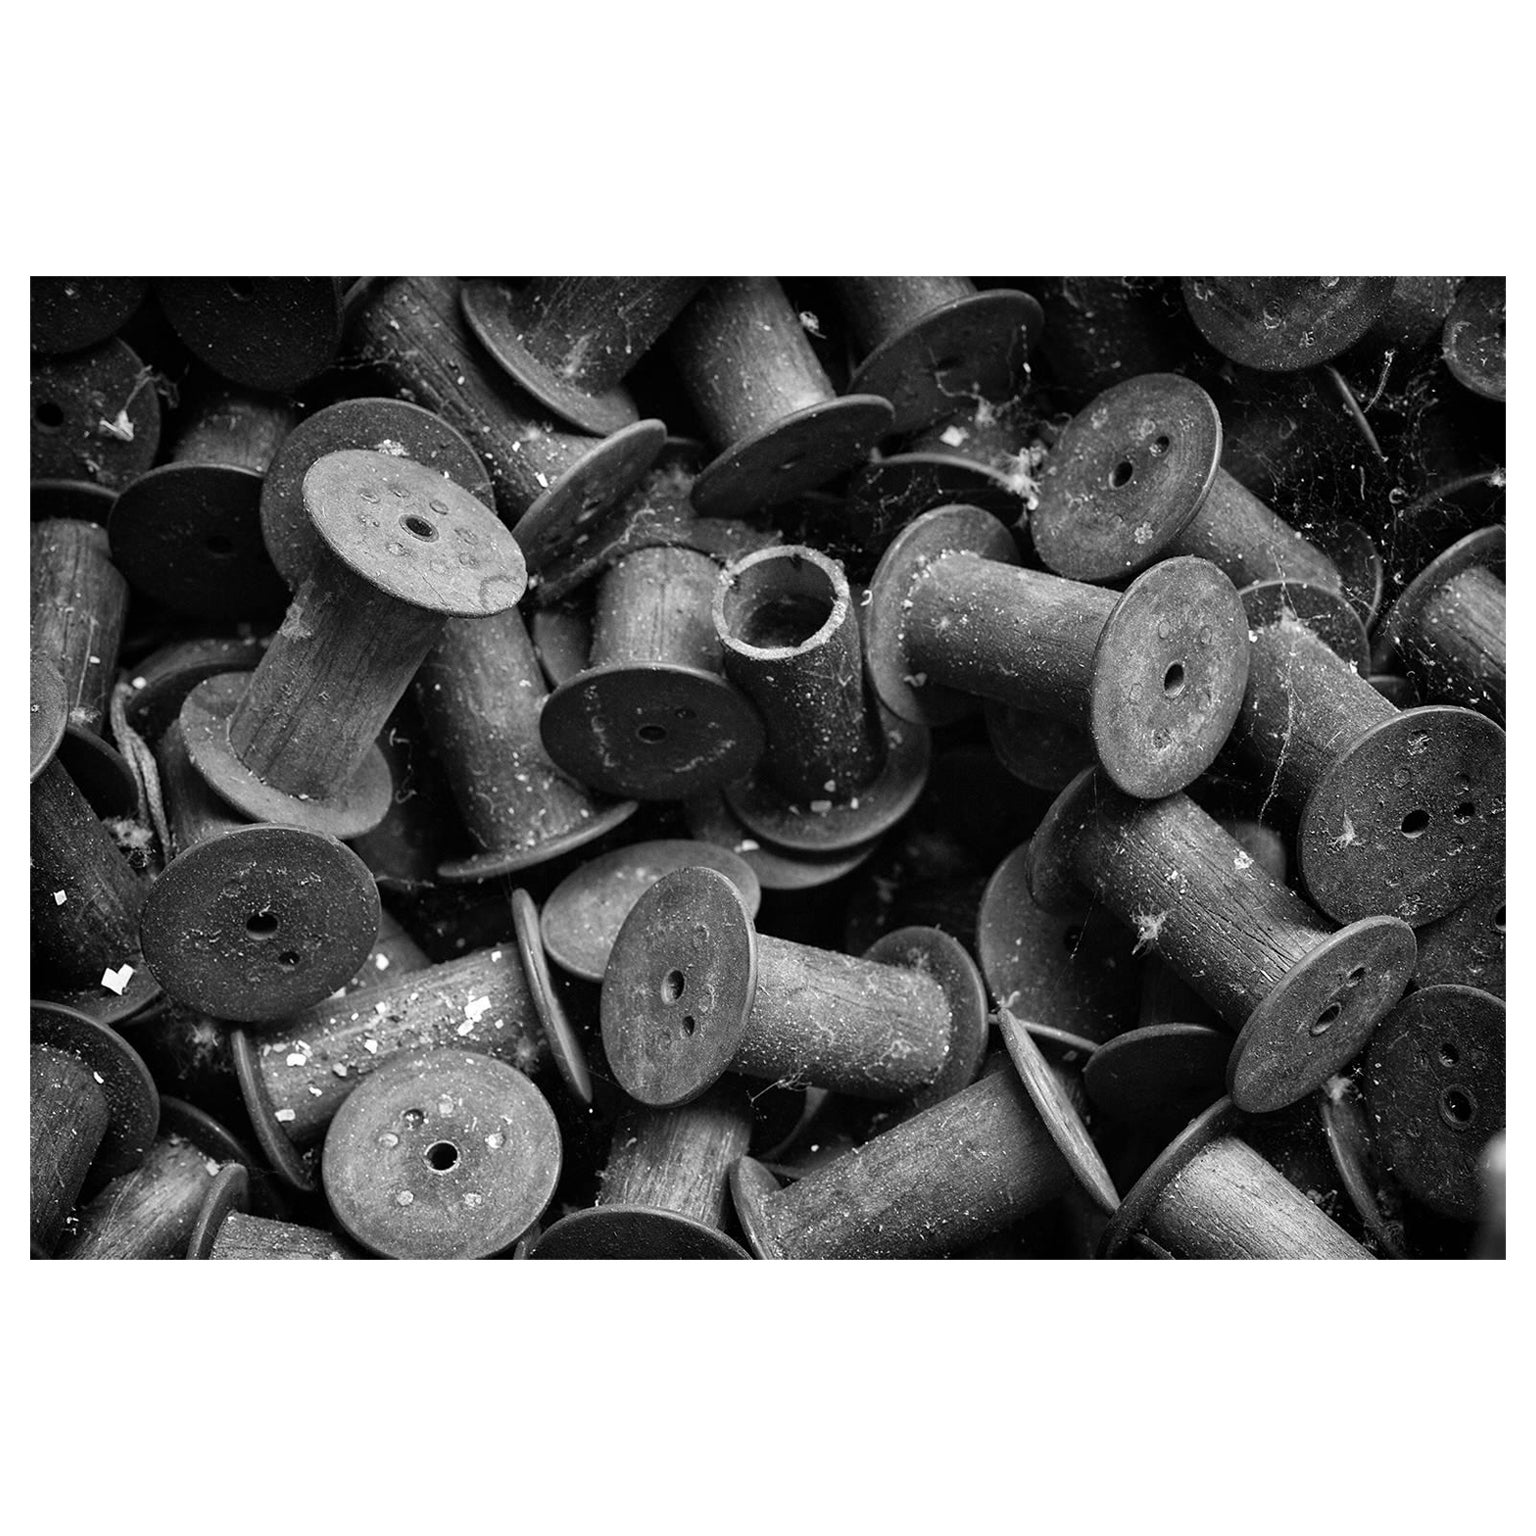 Rebecca Skinner Still-Life Photograph - "Spools #2", black and white, abandoned, silk mill, industrial, photograph